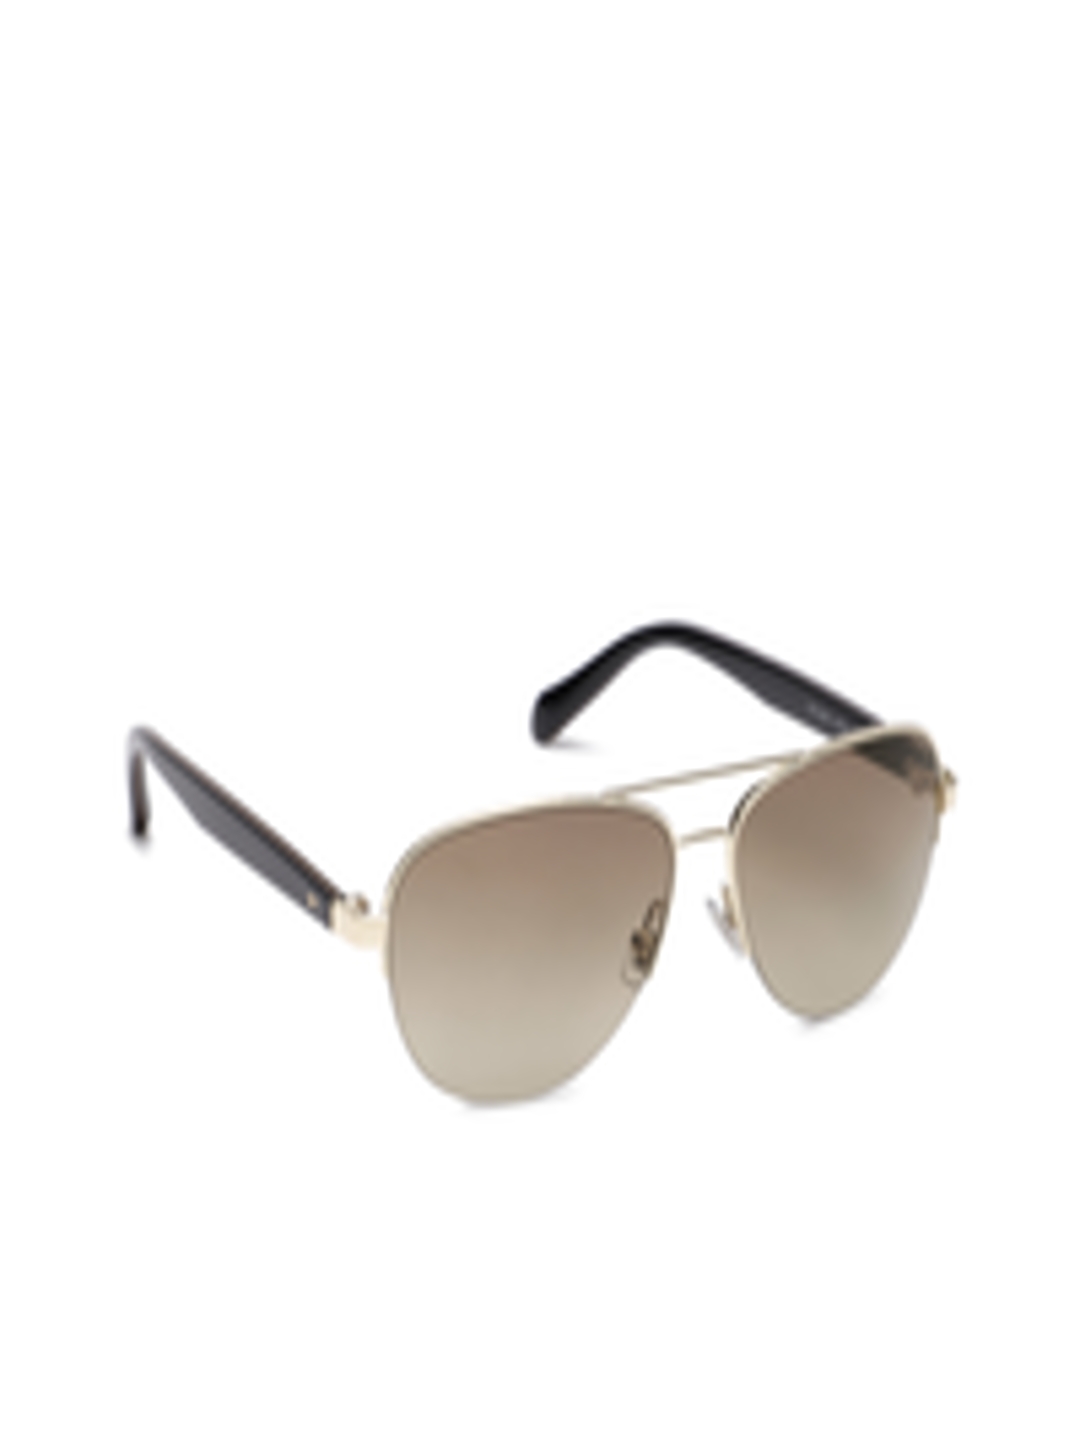 Fossil FOS 3062/S Aviator Sunglasses For , Woman 